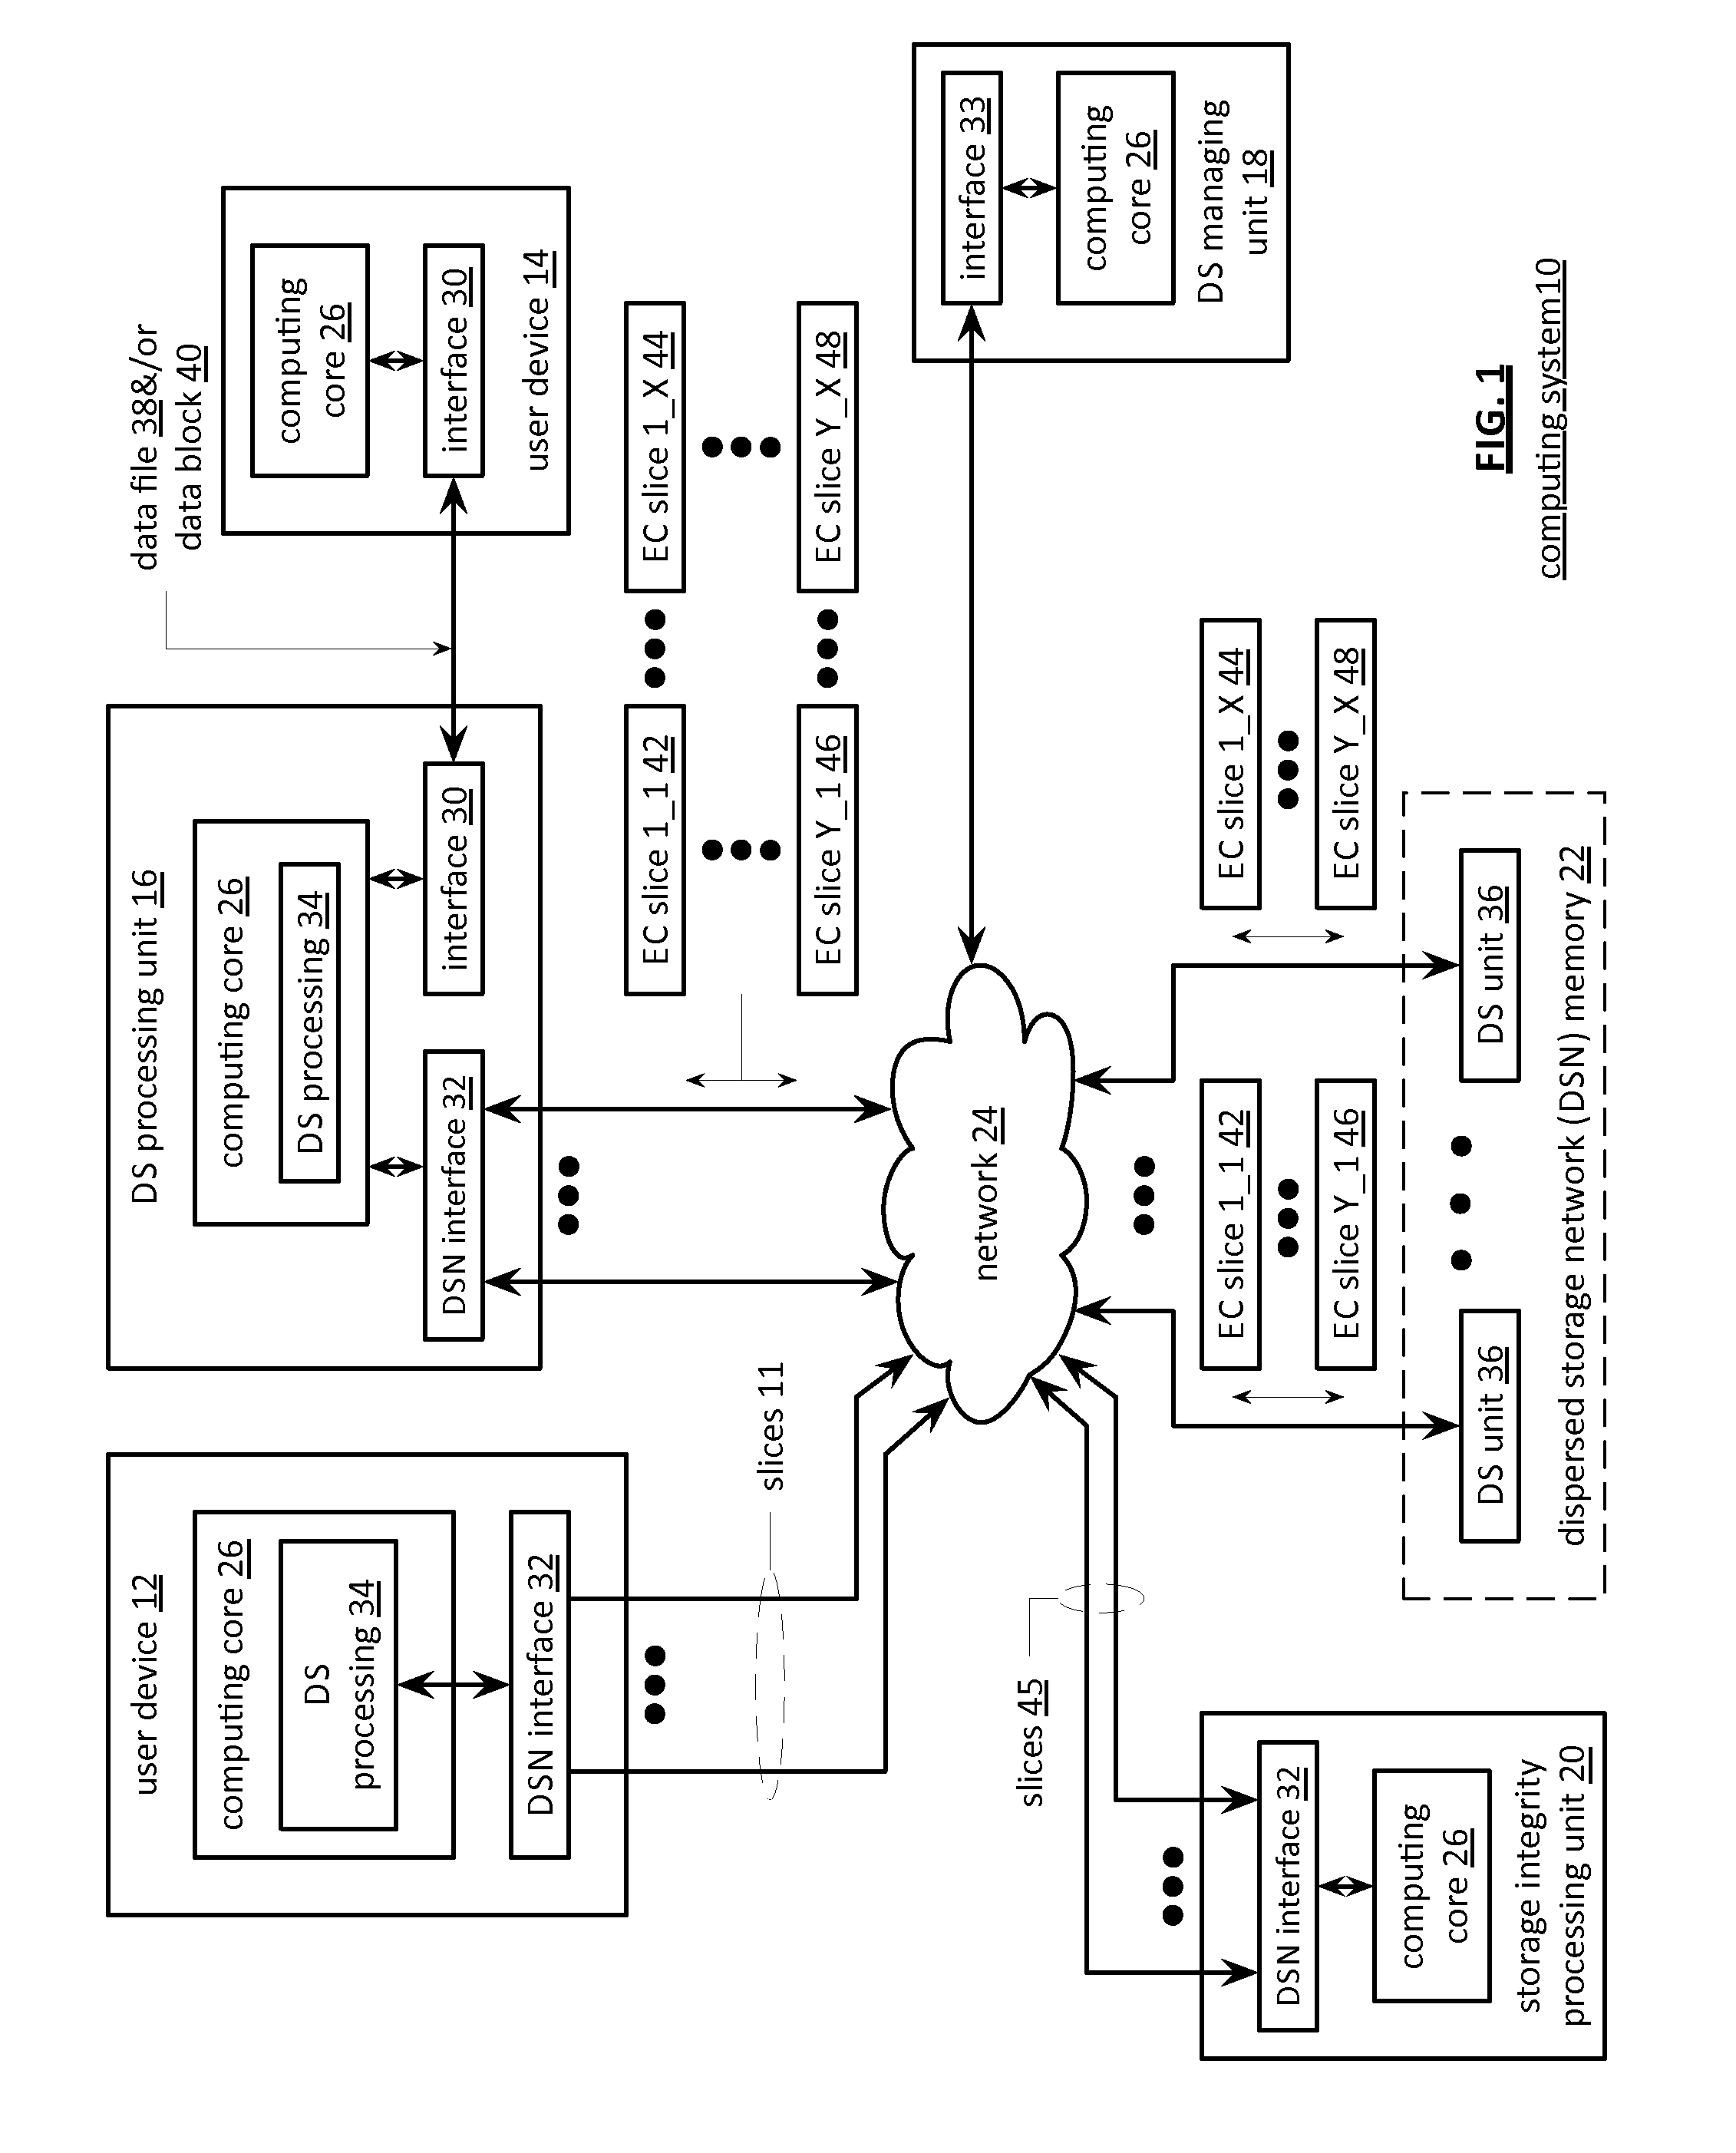 Partitioning data for storage in a dispersed storage network